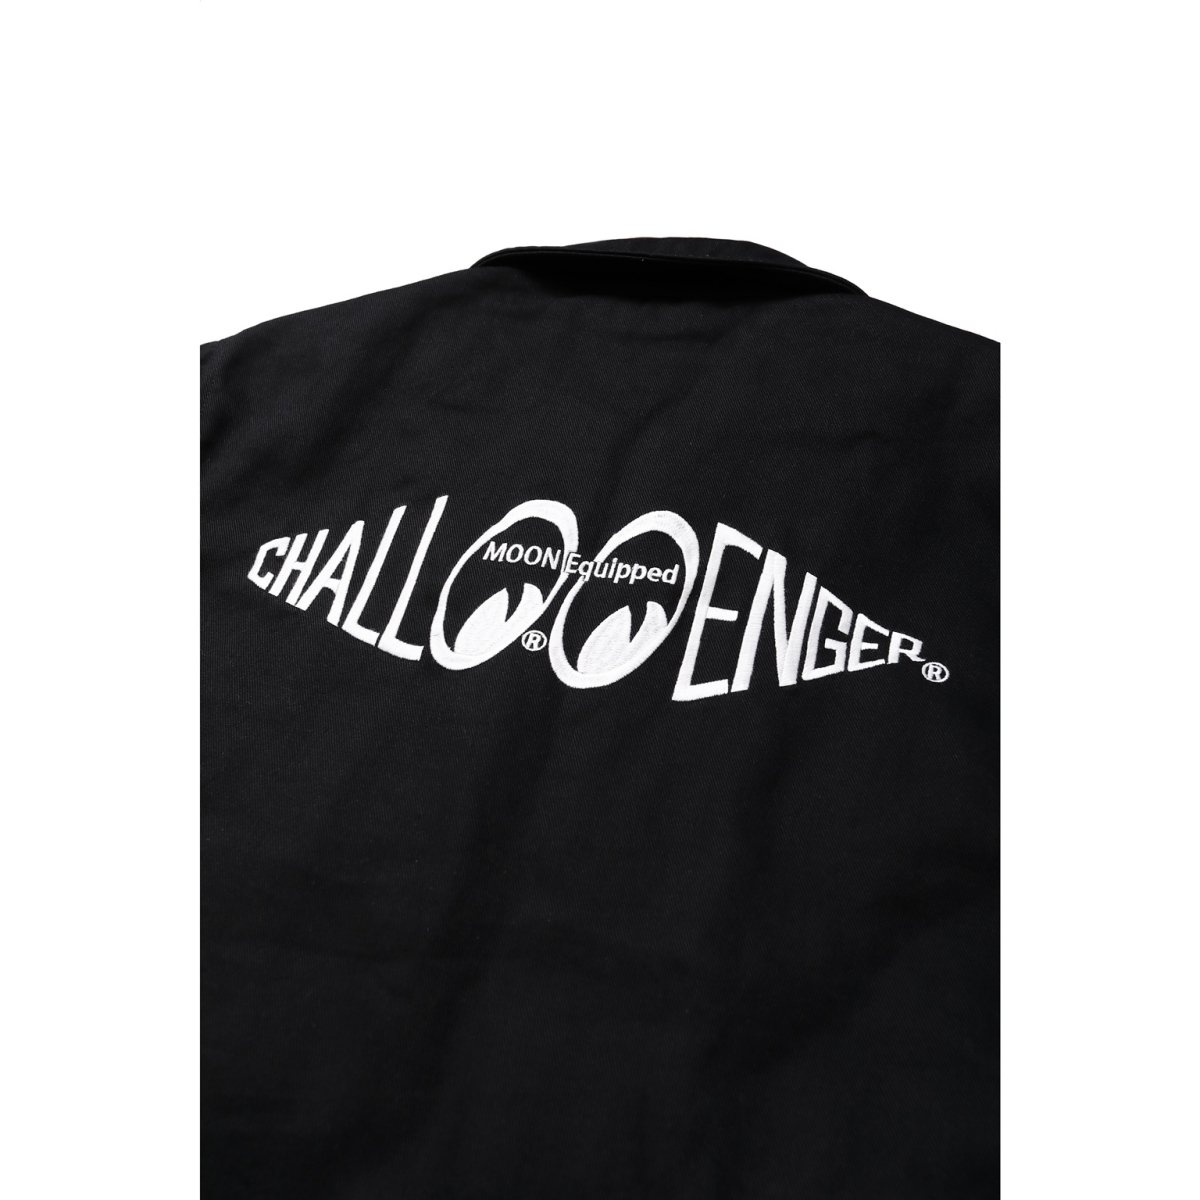 ☆CHALLENGER x MOON Equipped WORK JACKET新品未使用